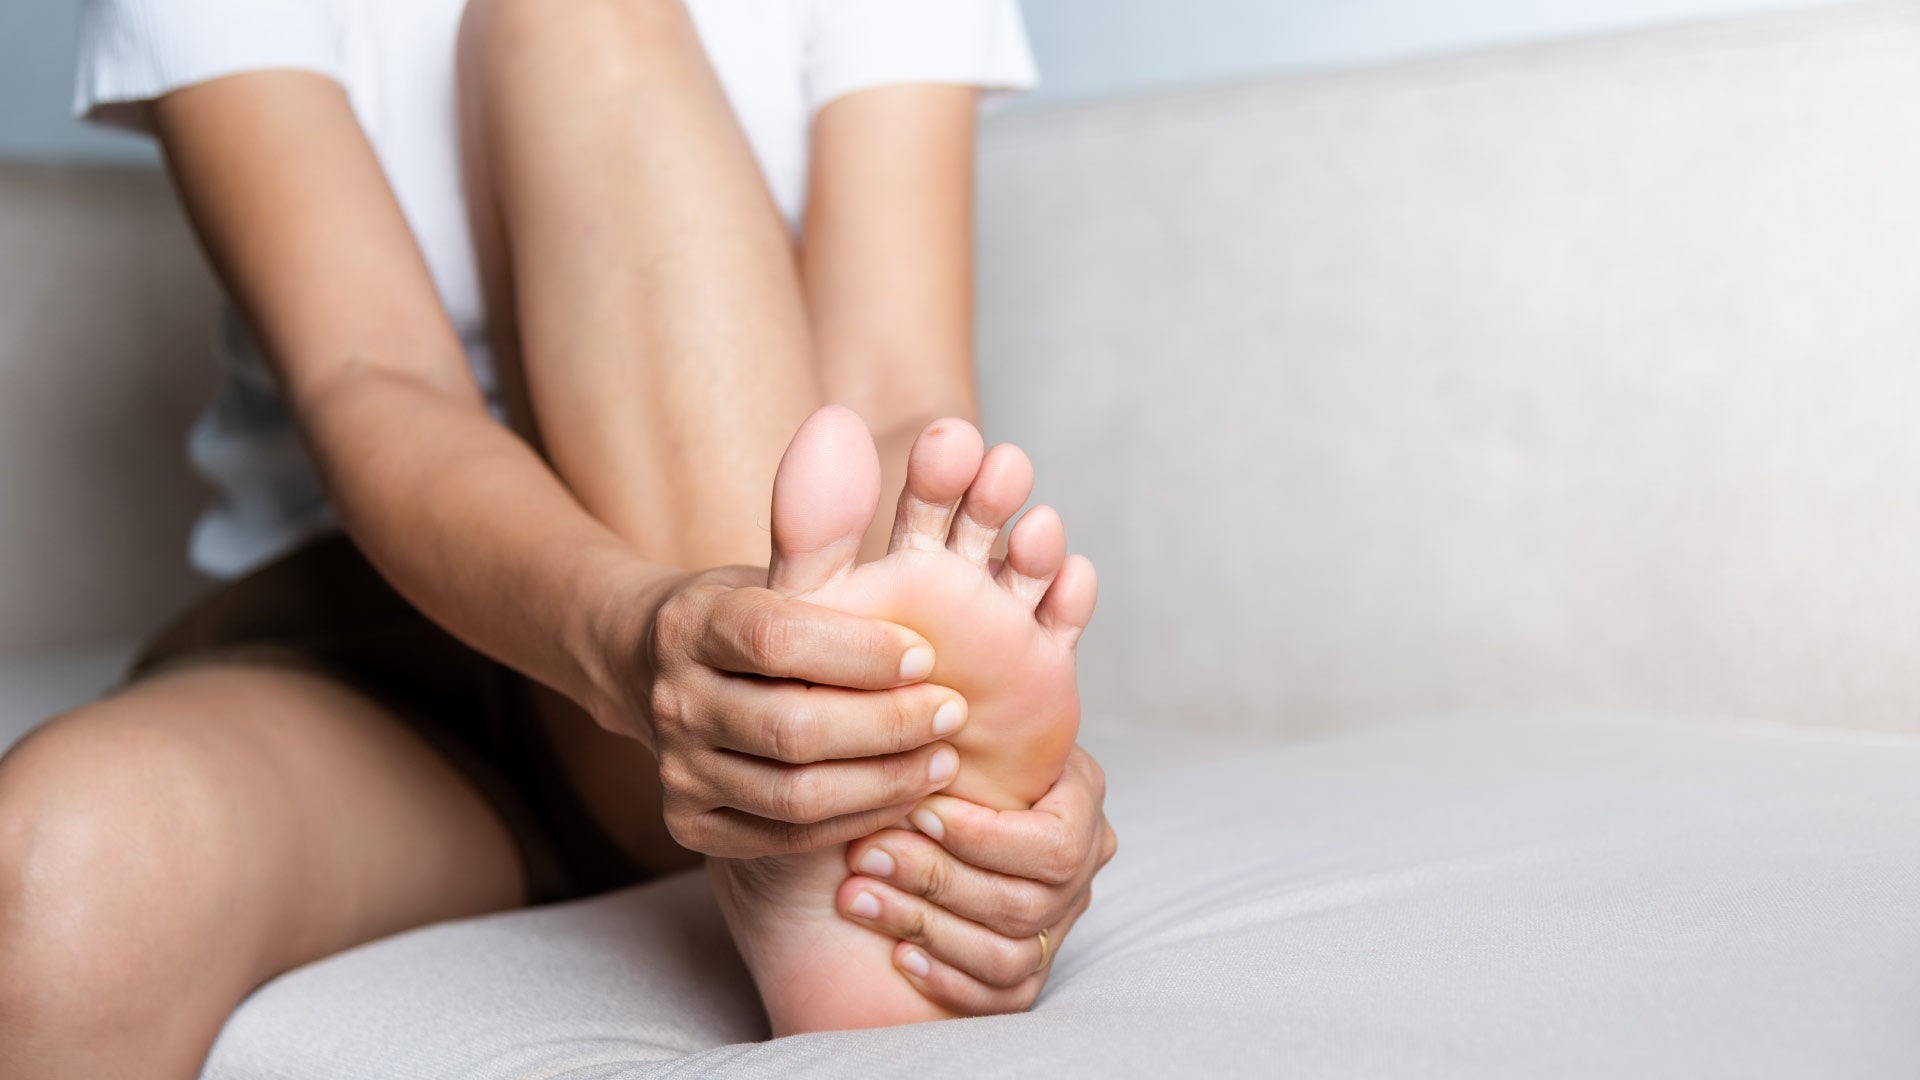 How to Look After Your Feet | LloydsPharmacy